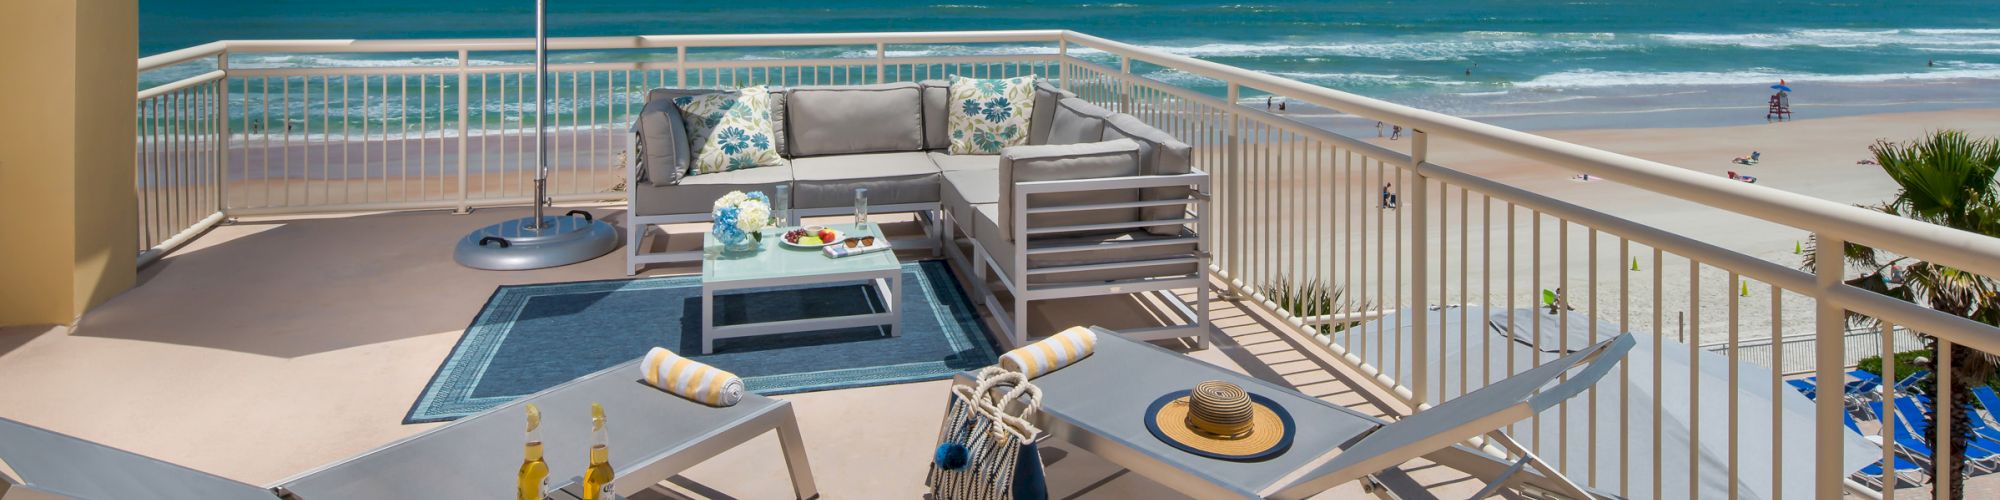 A beachfront patio with lounge chairs, an umbrella, a table, and drinks on a raised platform. Overlooks a beach and ocean on a sunny day.